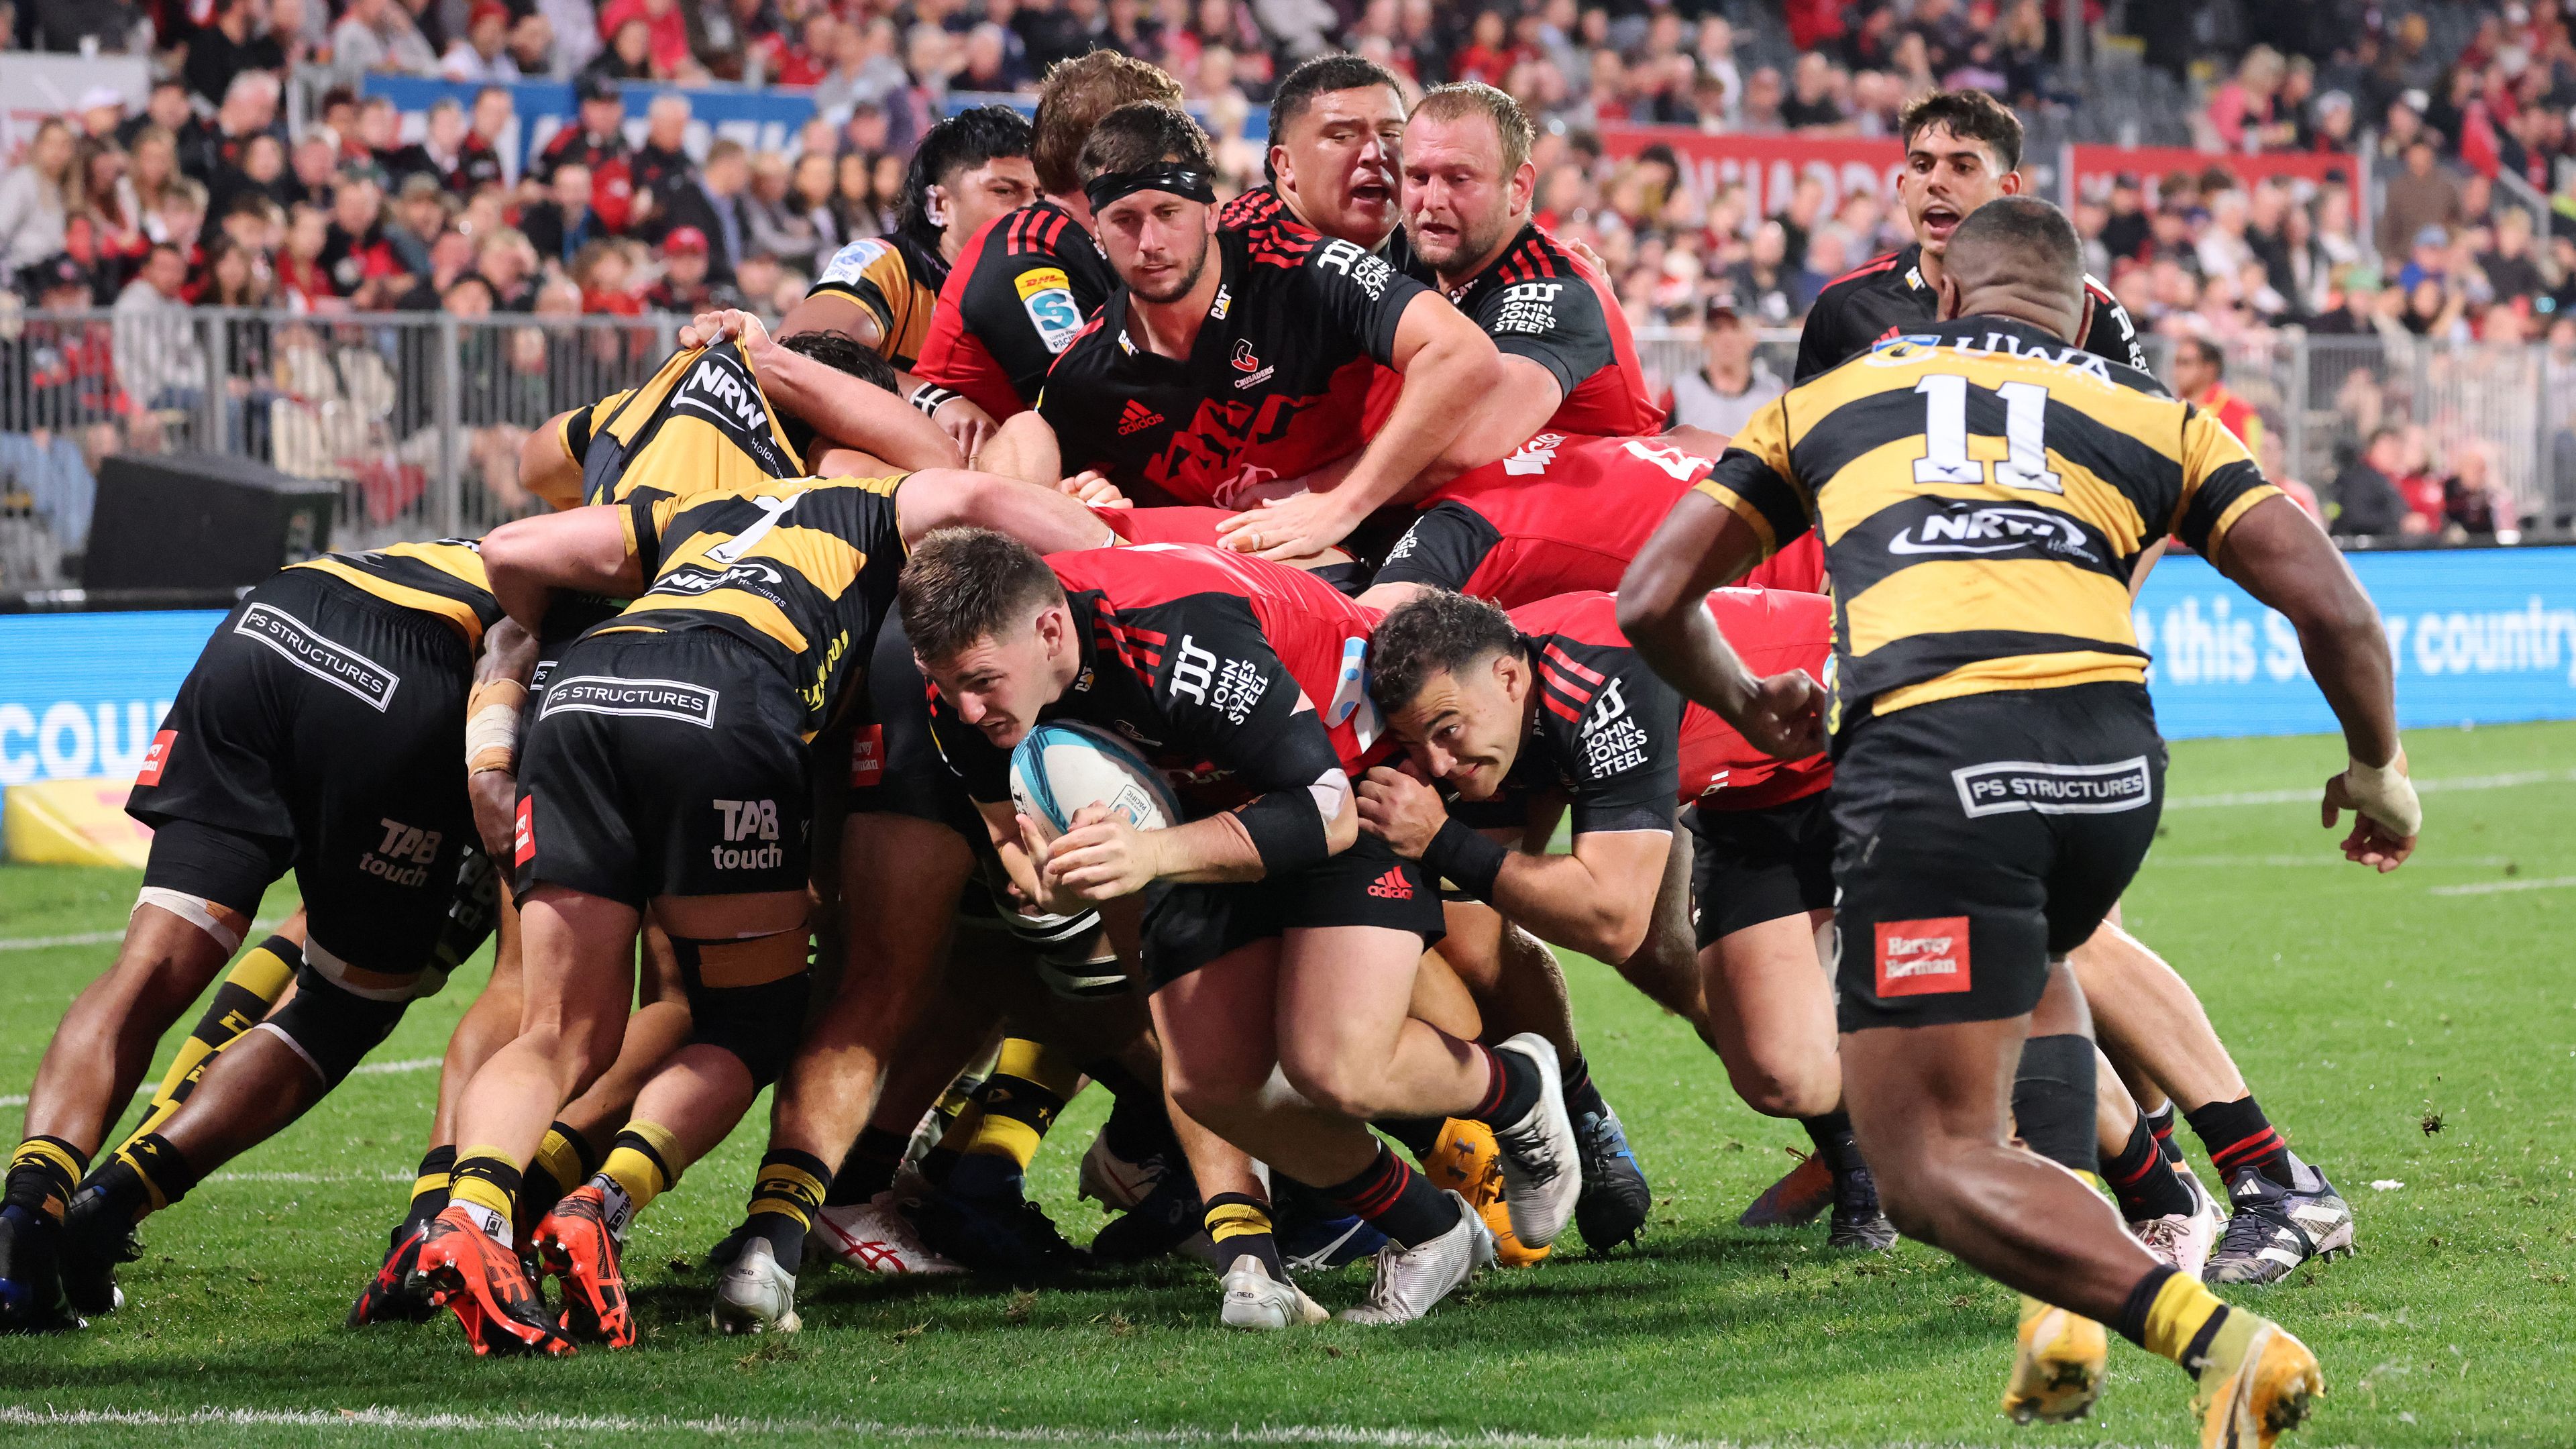 Brodie McAlister dives to score his third try off a maul during the round 11 Super Rugby Pacific match between Crusaders and Western Force.